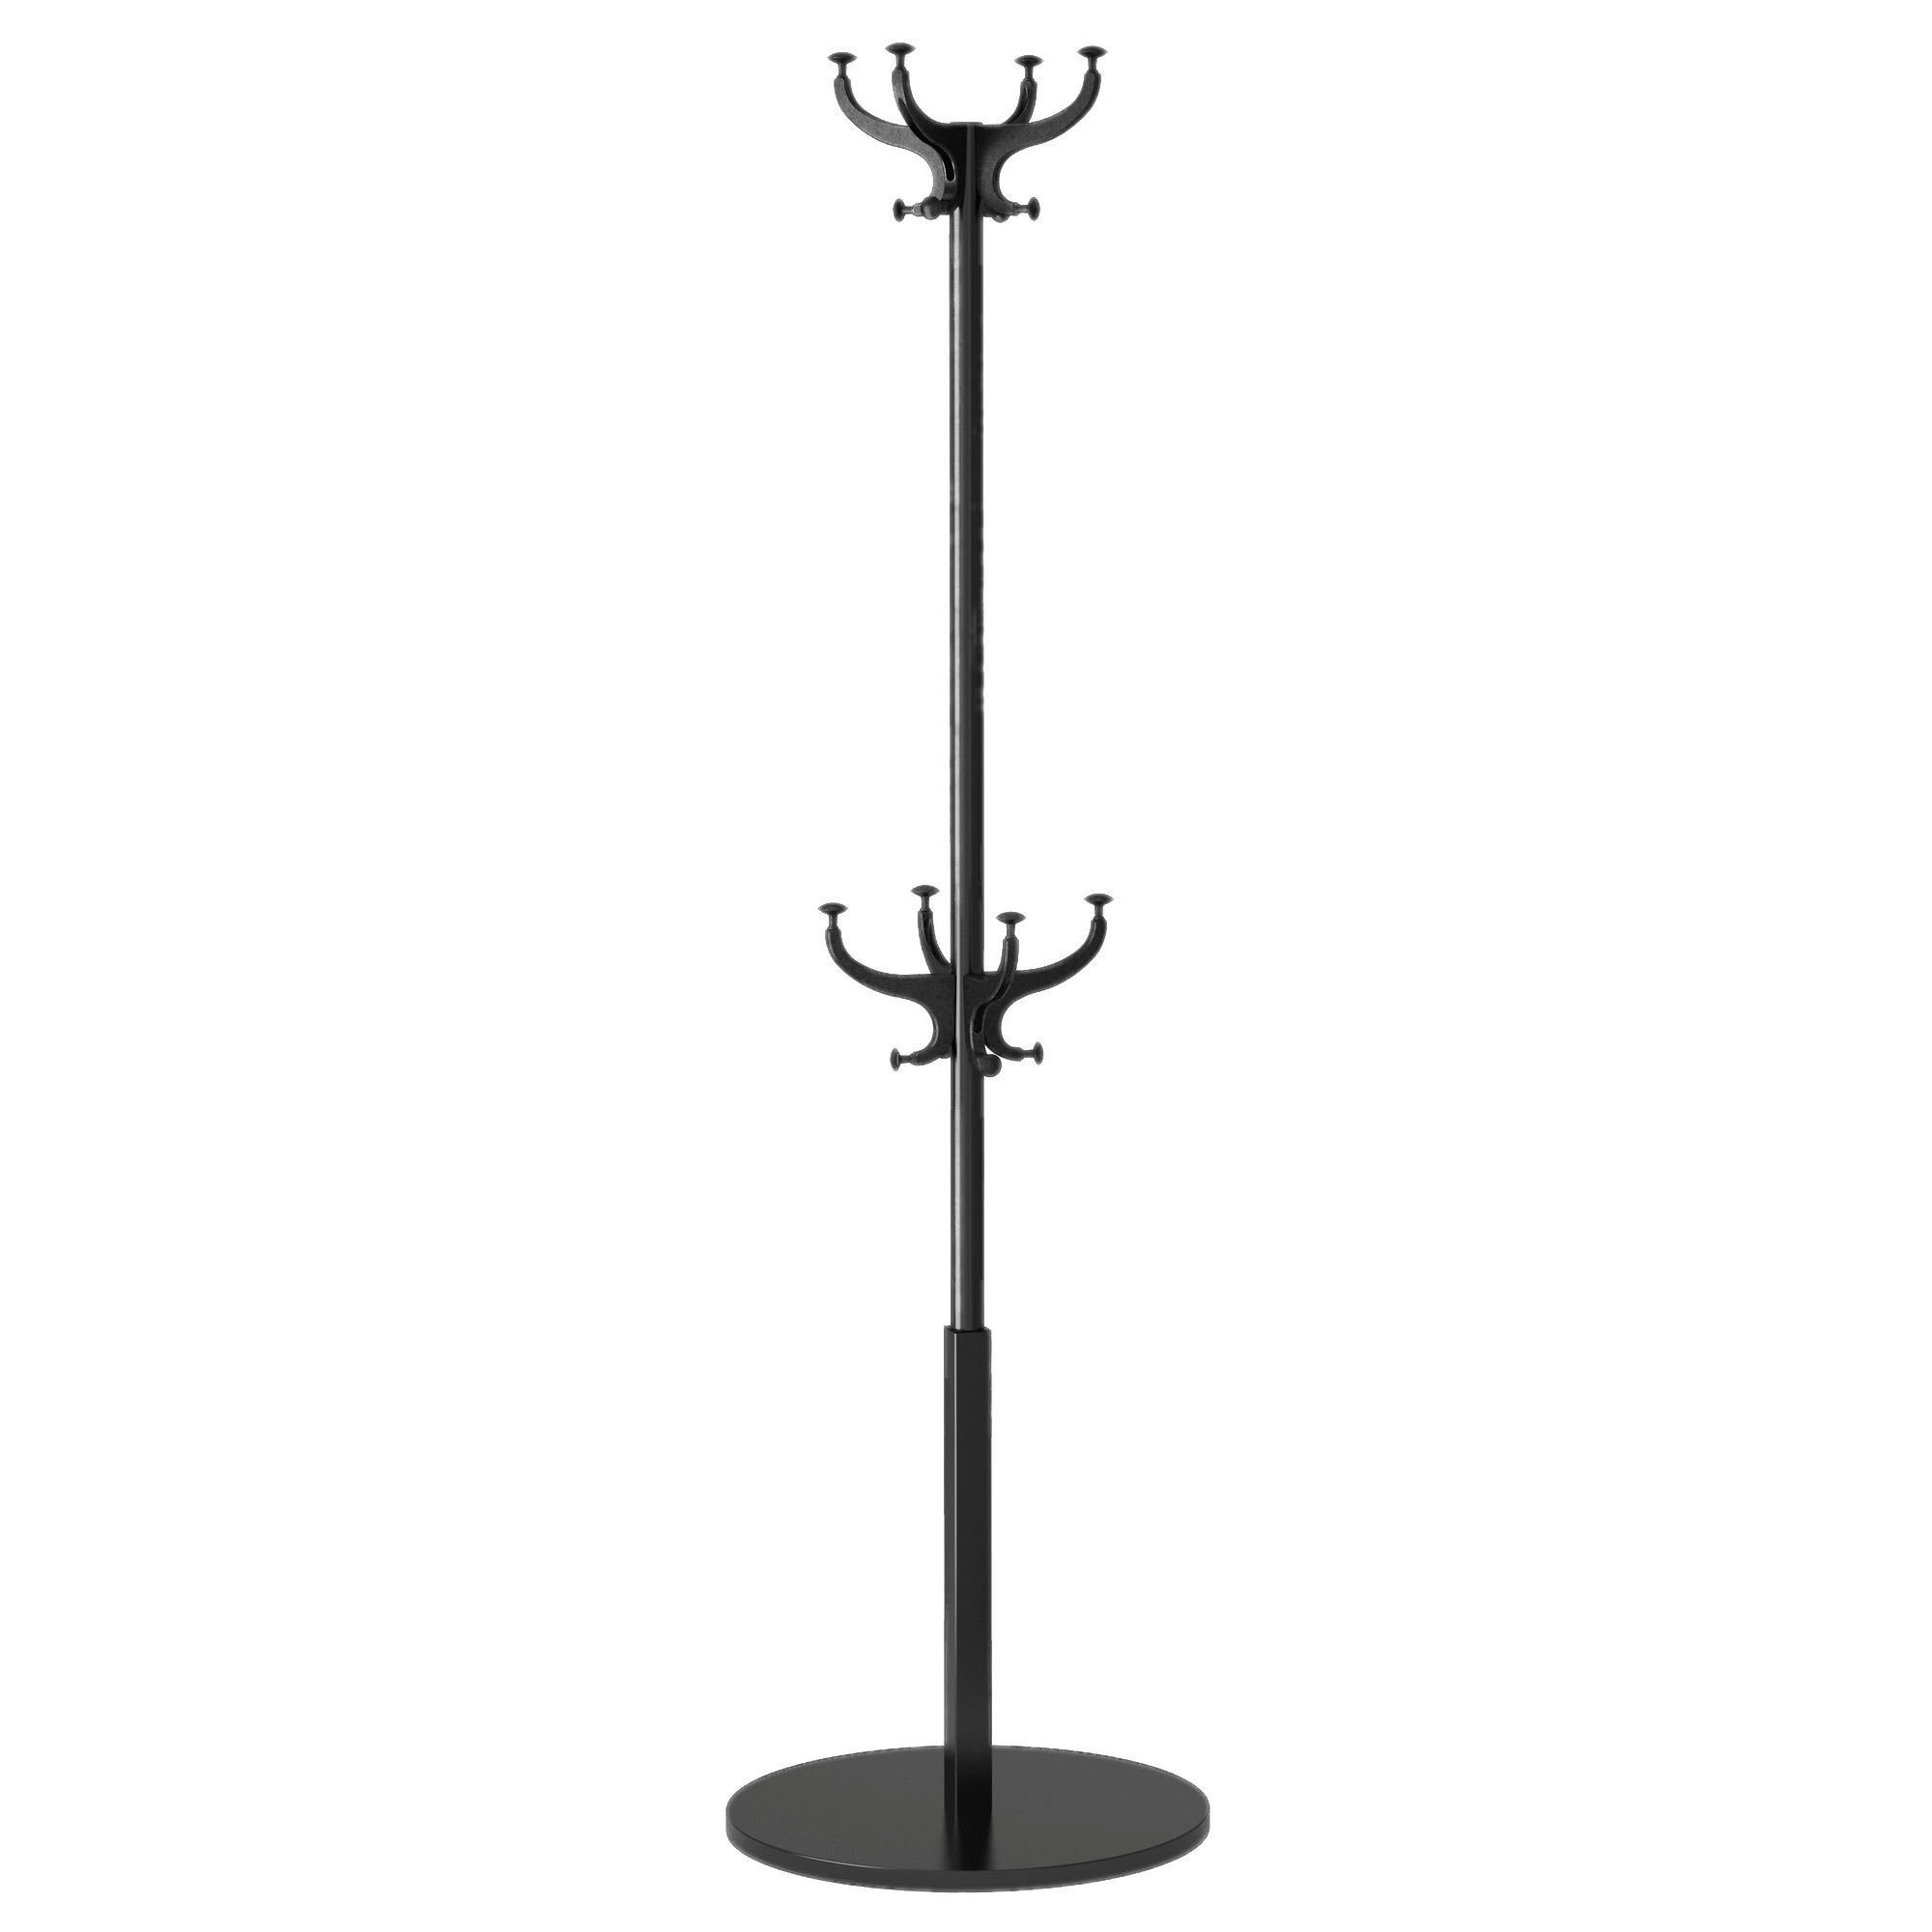 Coat Stand icons